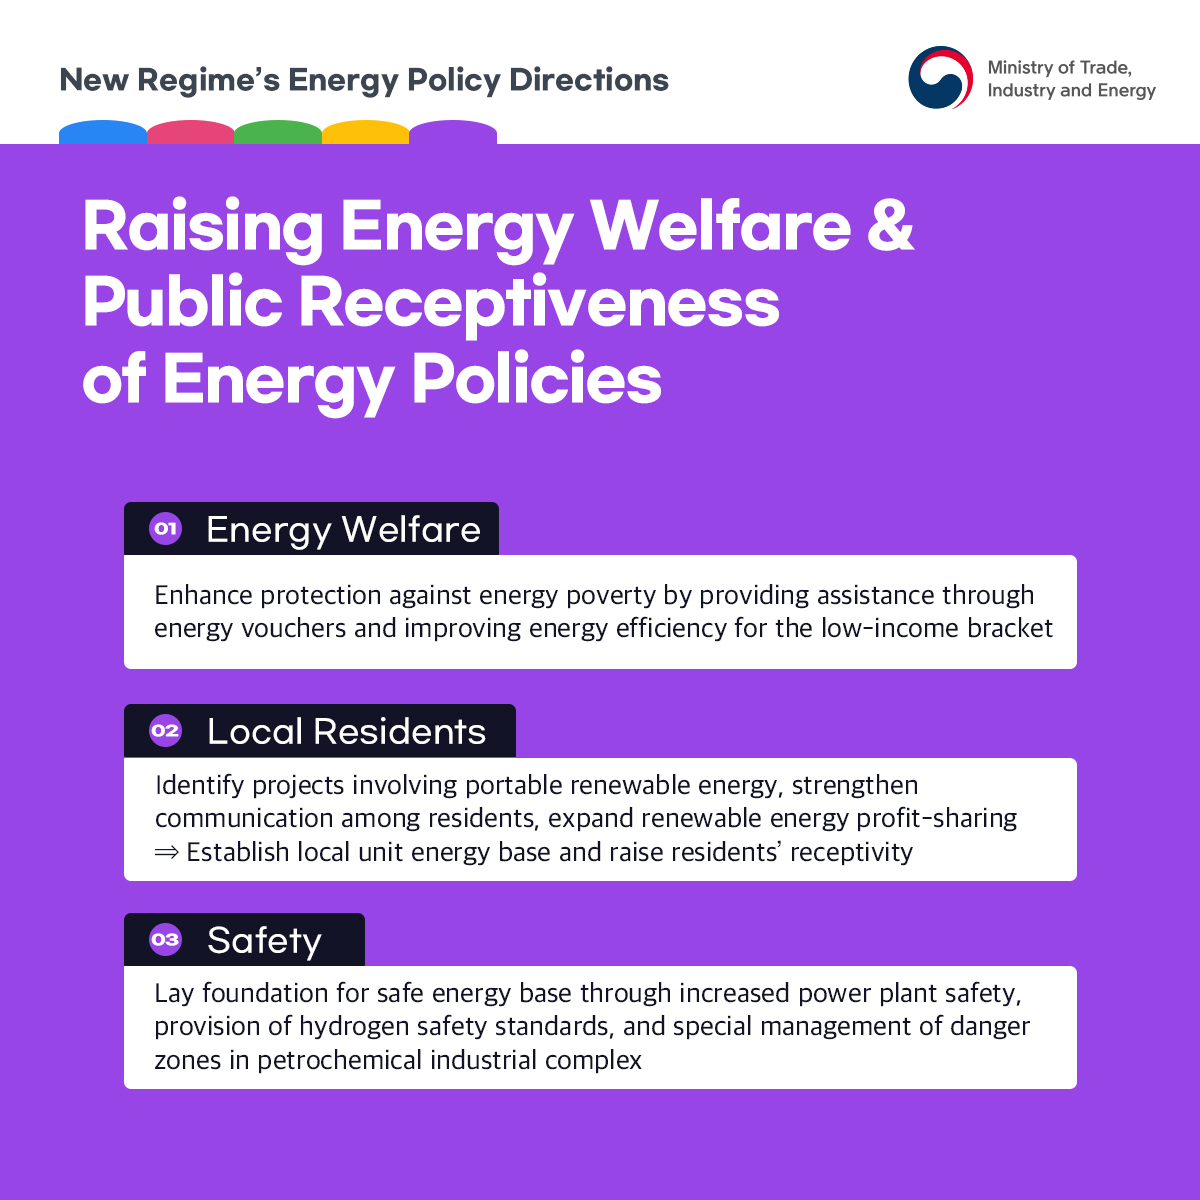 MOTIE announces New Regime's Energy Policy Directions Image 4